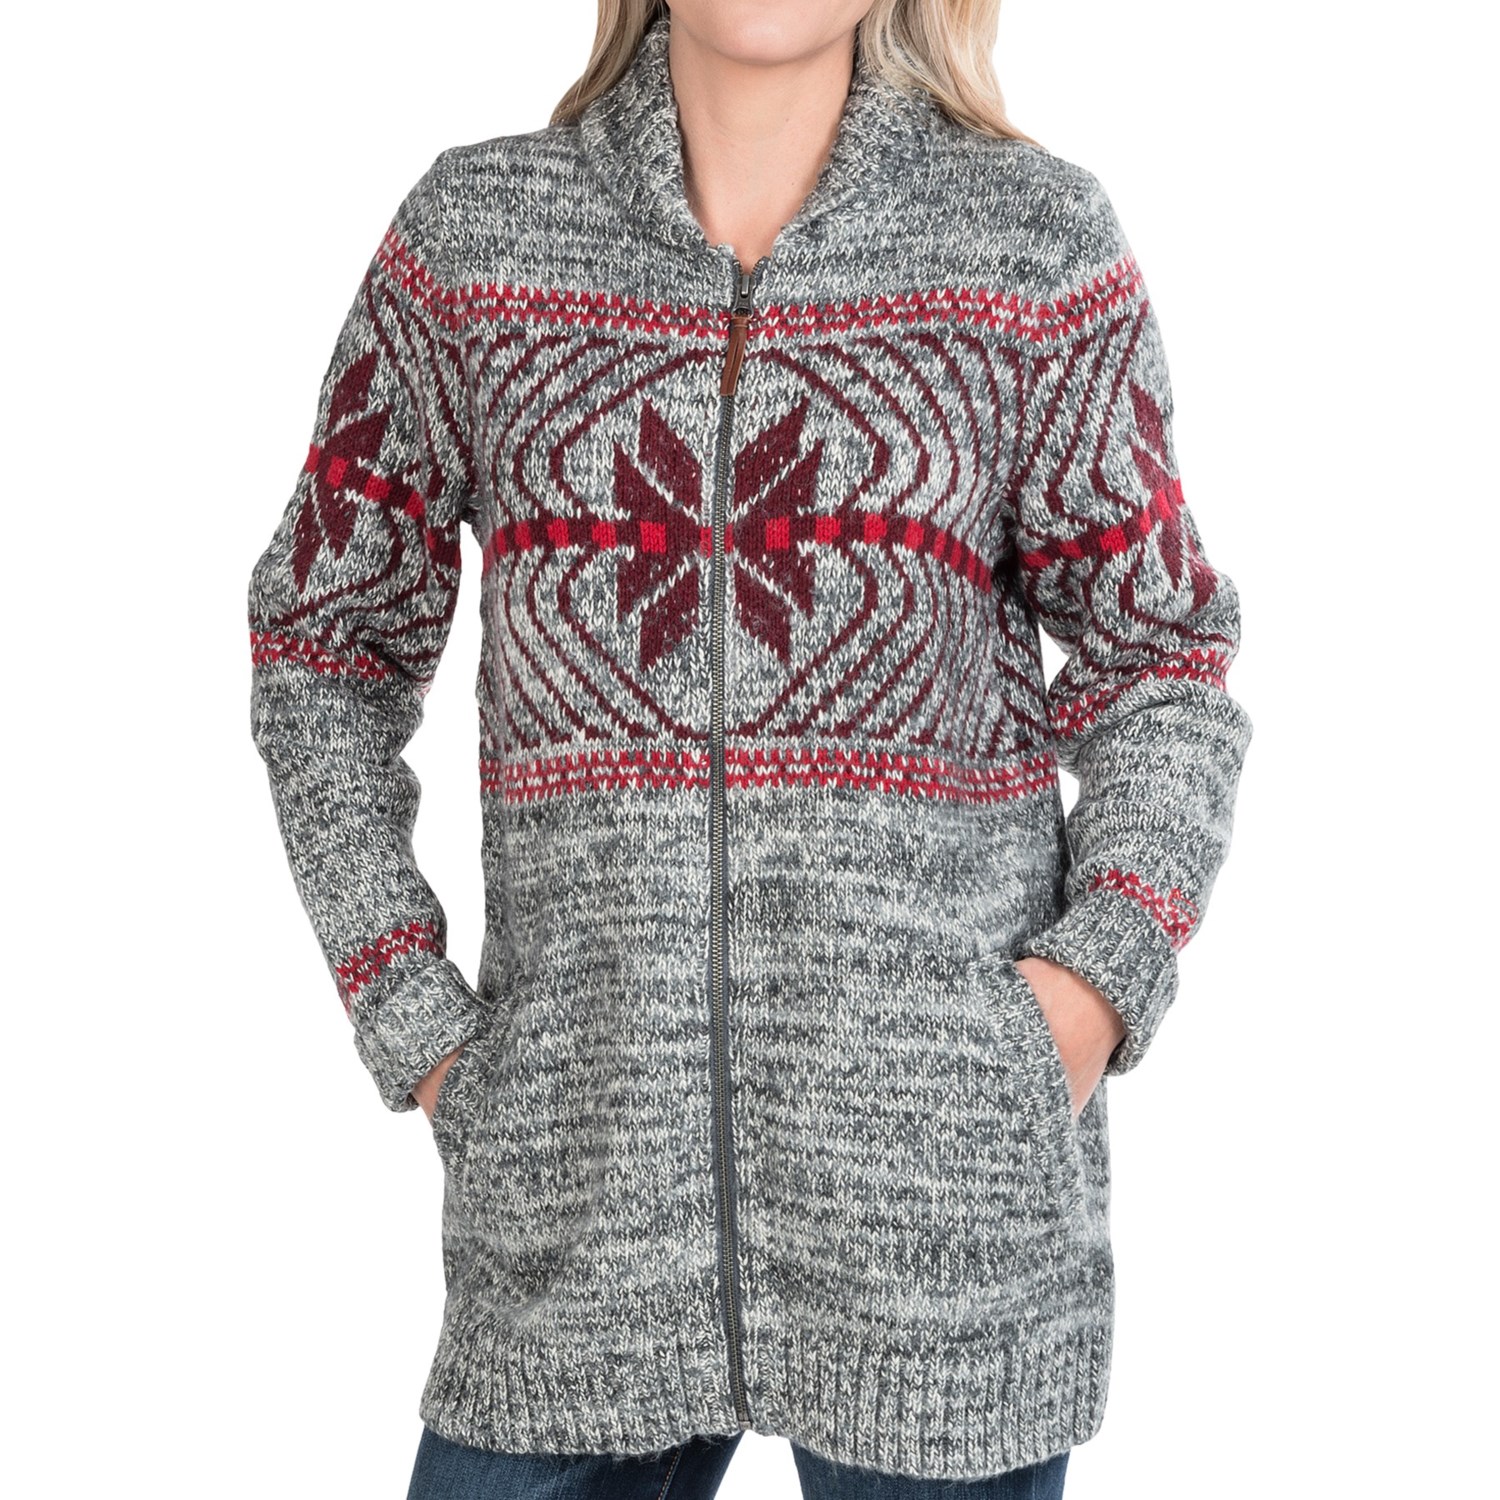 Woolrich White Label Native Cardigan Sweater (For Women) 8519J